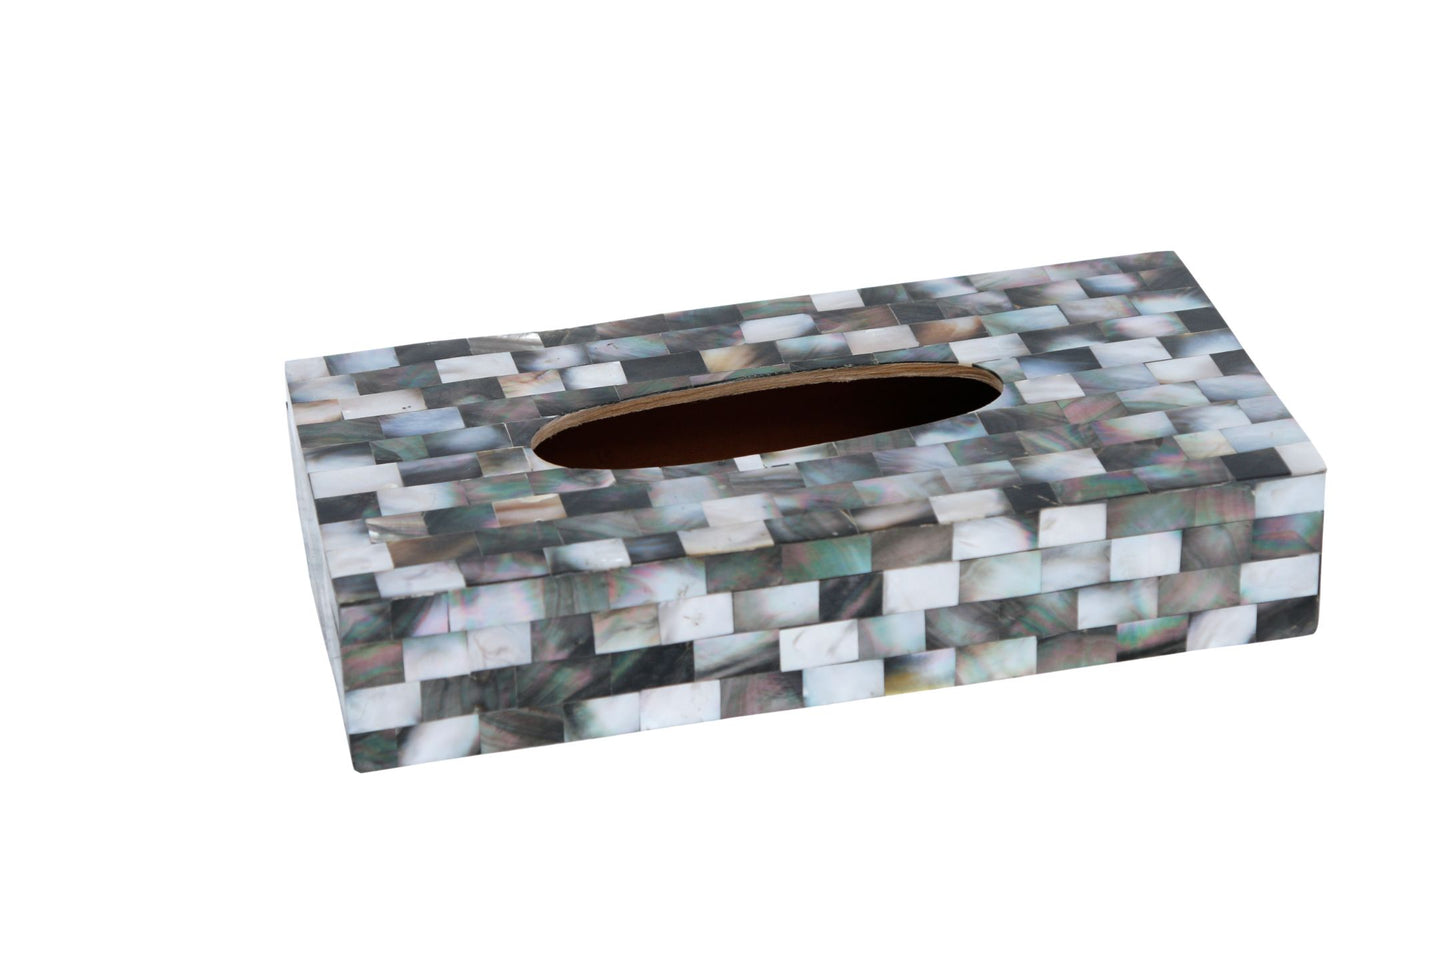 Opulent Homes Black Mother of Pearl Tissue Box 1052